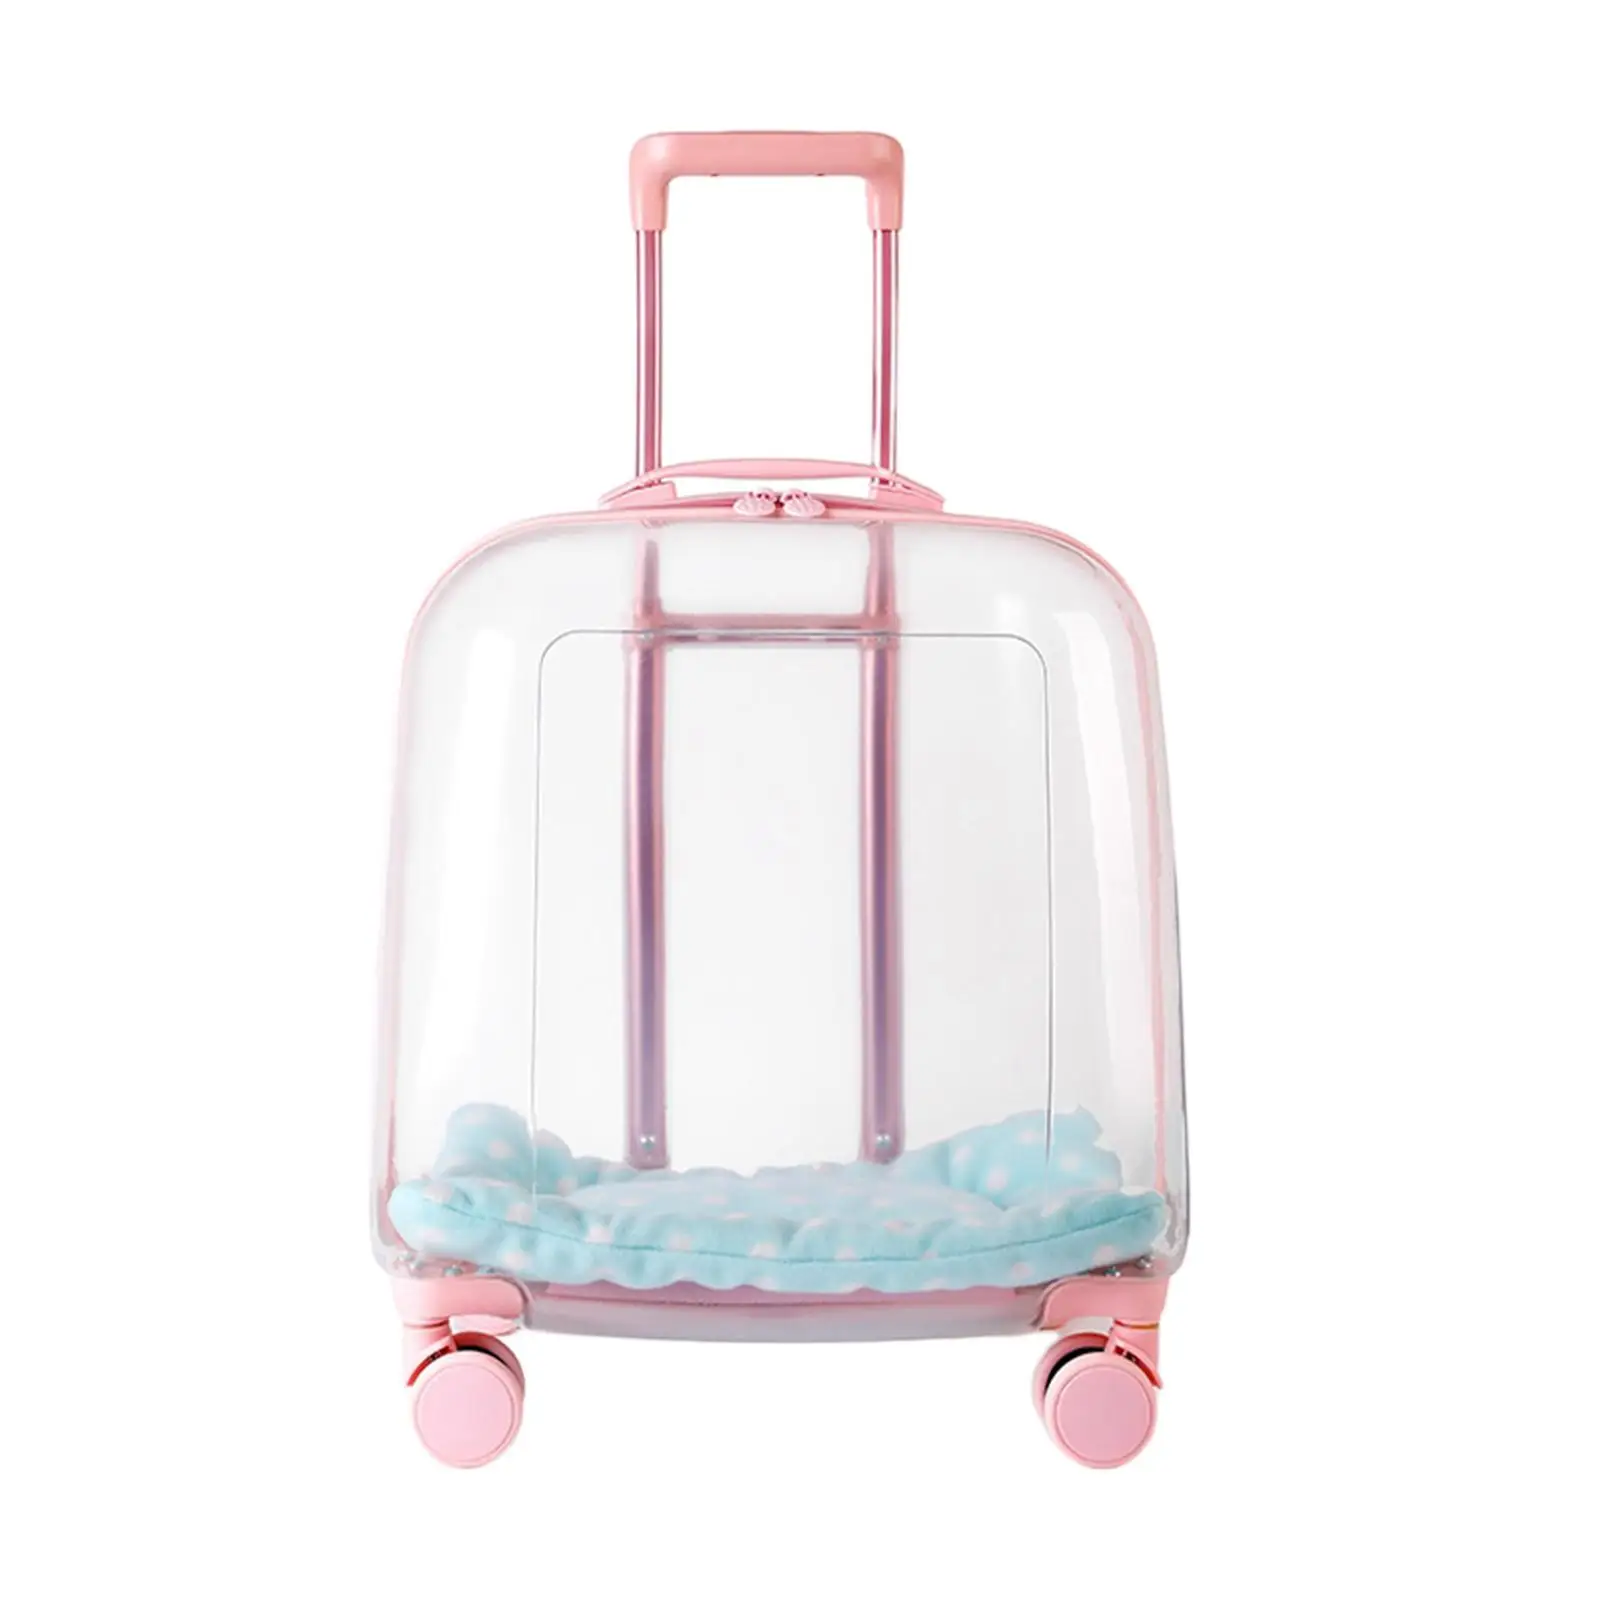 Lightweight Cat Trolley Case Dog Kennel with Silent Wheel Hard Pet Carrier for Kitten Kitty Small Animals Puppy Travel Hiking